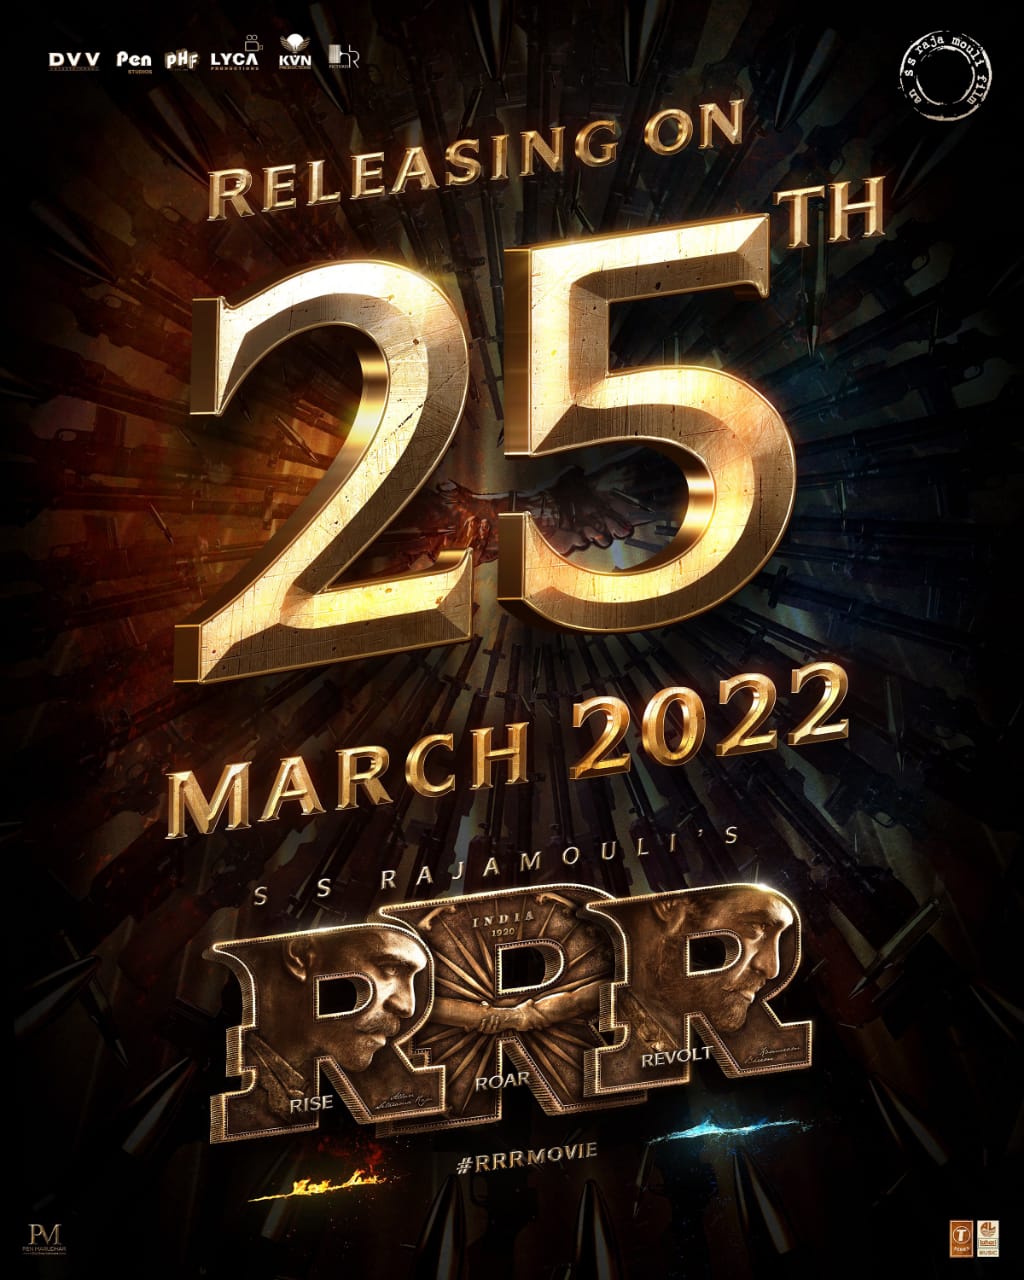 New release date of RRR movie announced